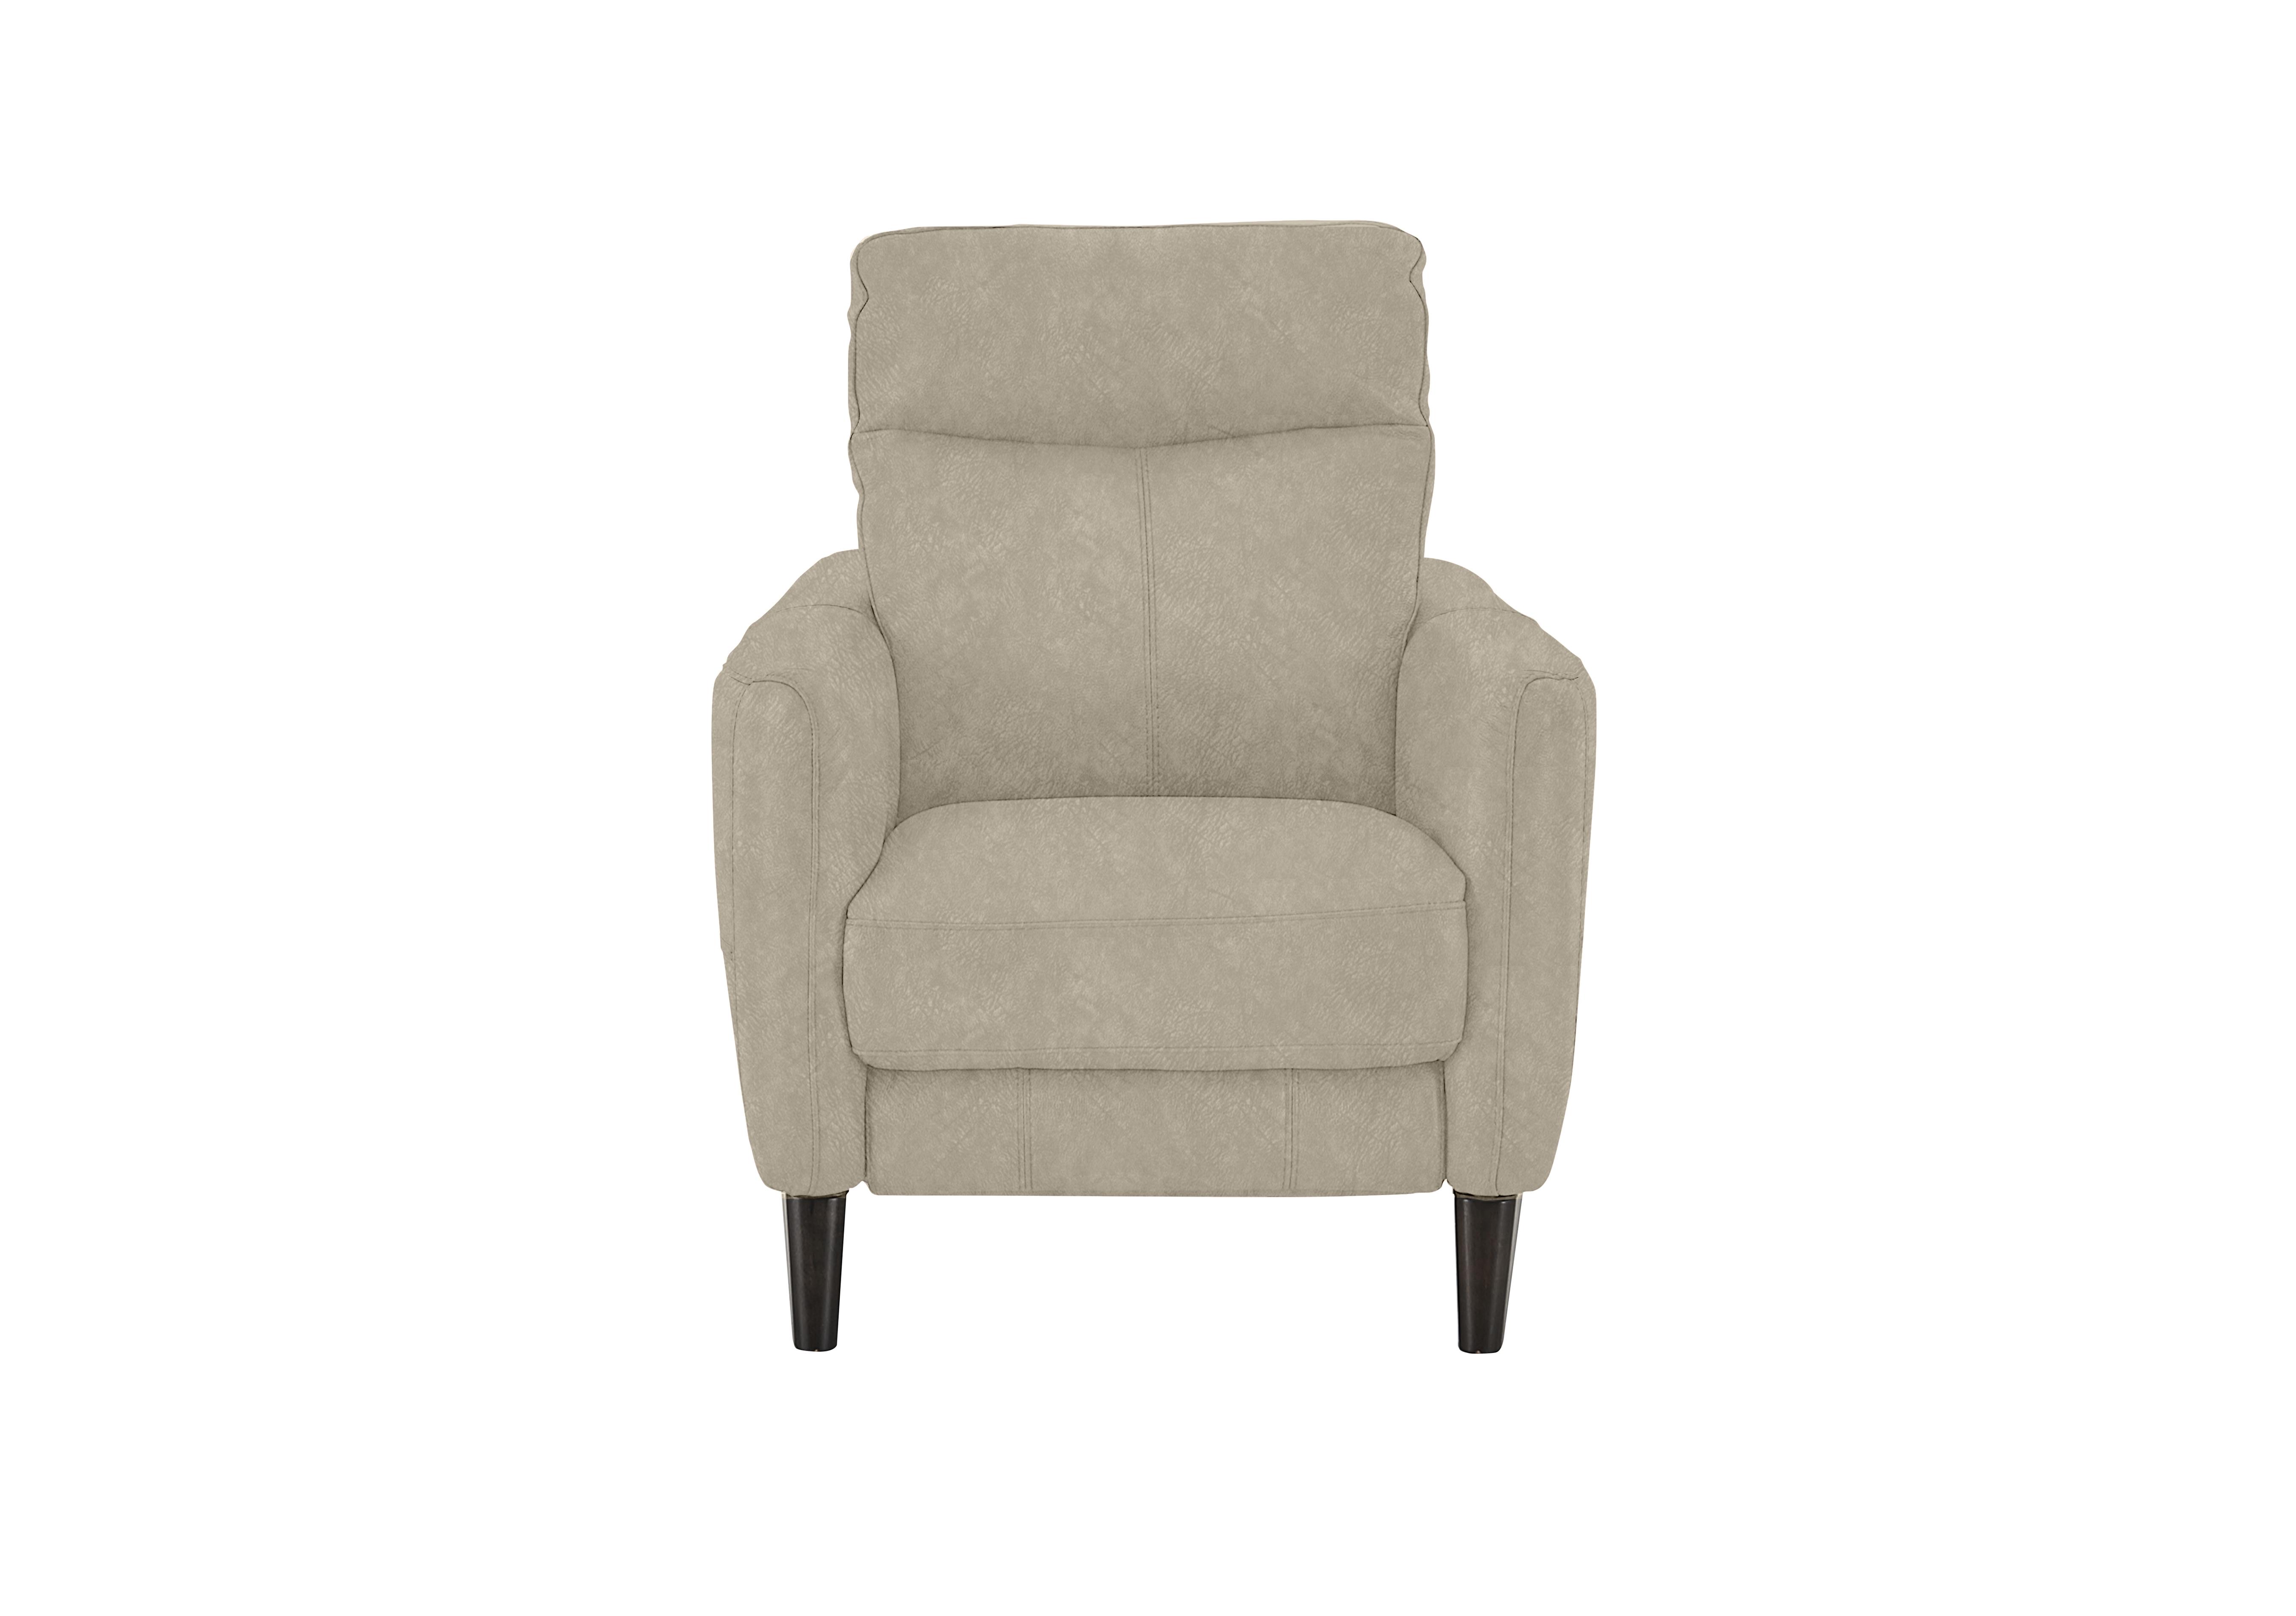 Compact Collection Petit Fabric Armchair in Bfa-Bnn-R26 Fv2 Cream on Furniture Village